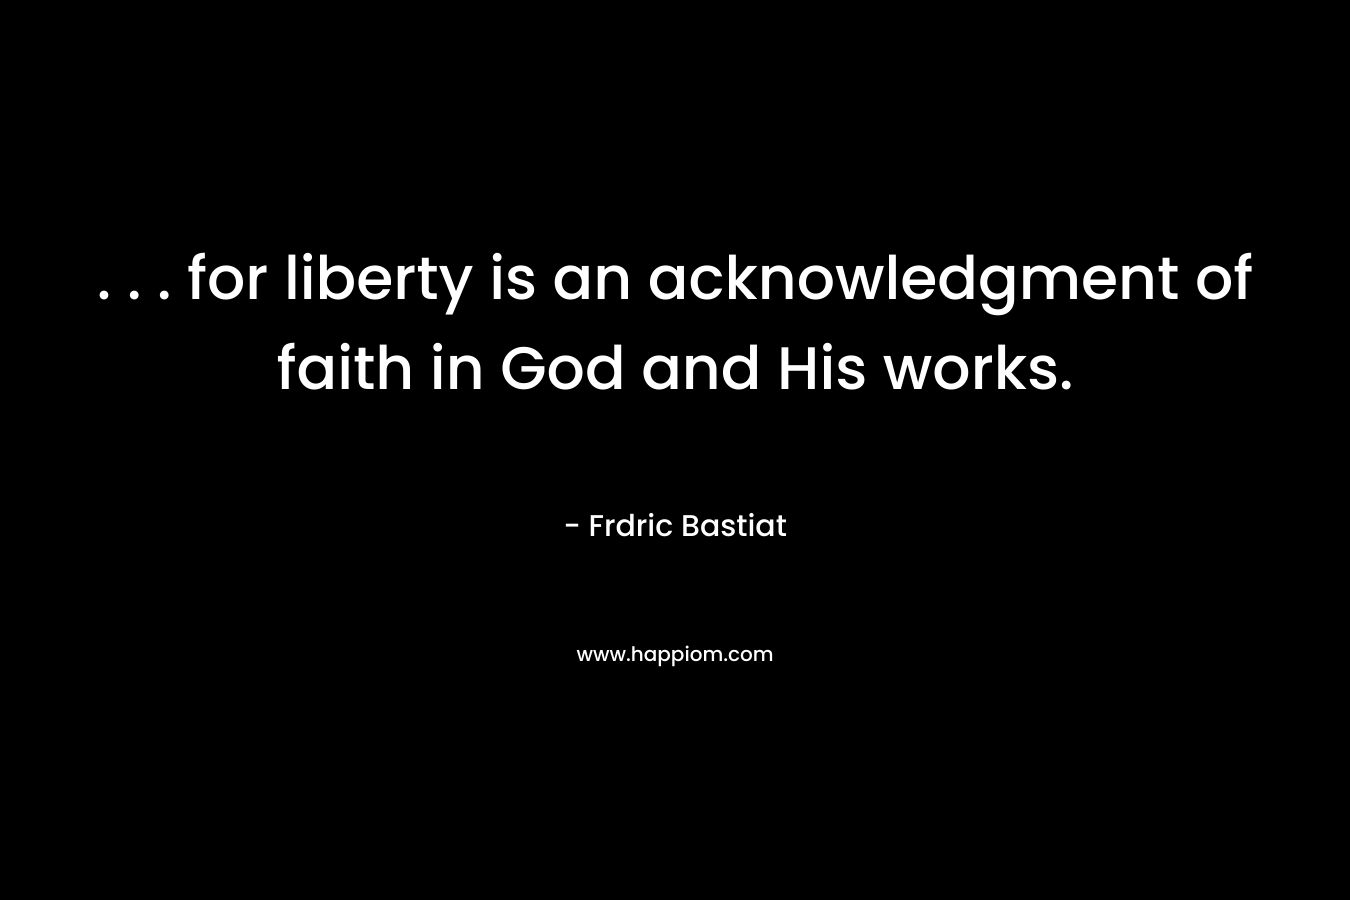 . . . for liberty is an acknowledgment of faith in God and His works. – Frdric Bastiat